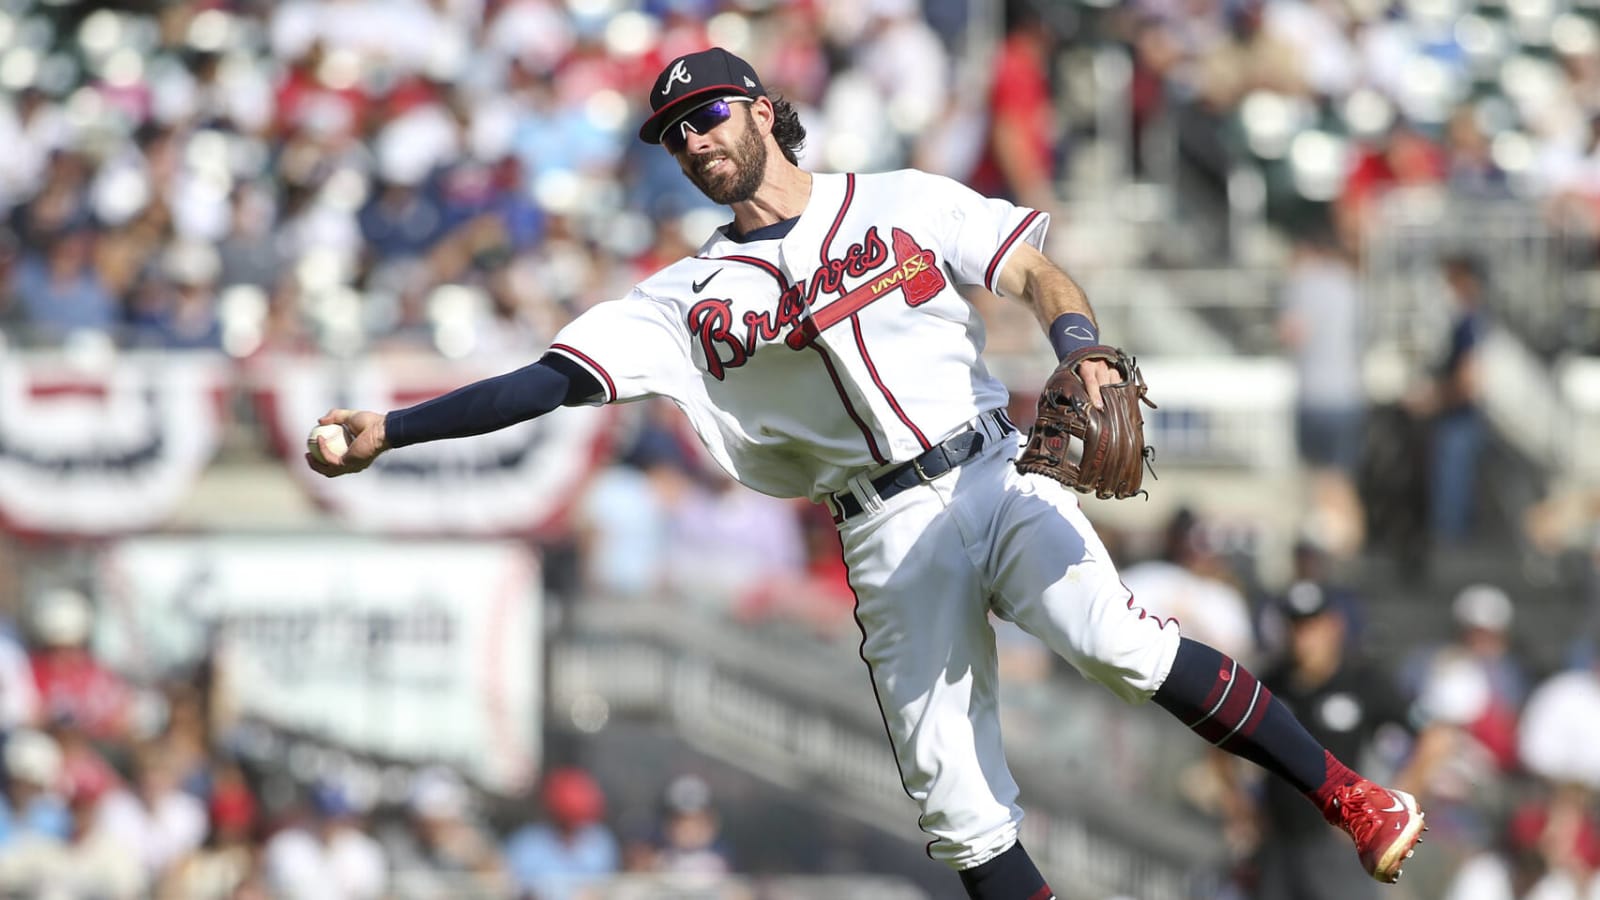 Atlanta Braves shortstop Dansby Swanson (7) throws the ball during